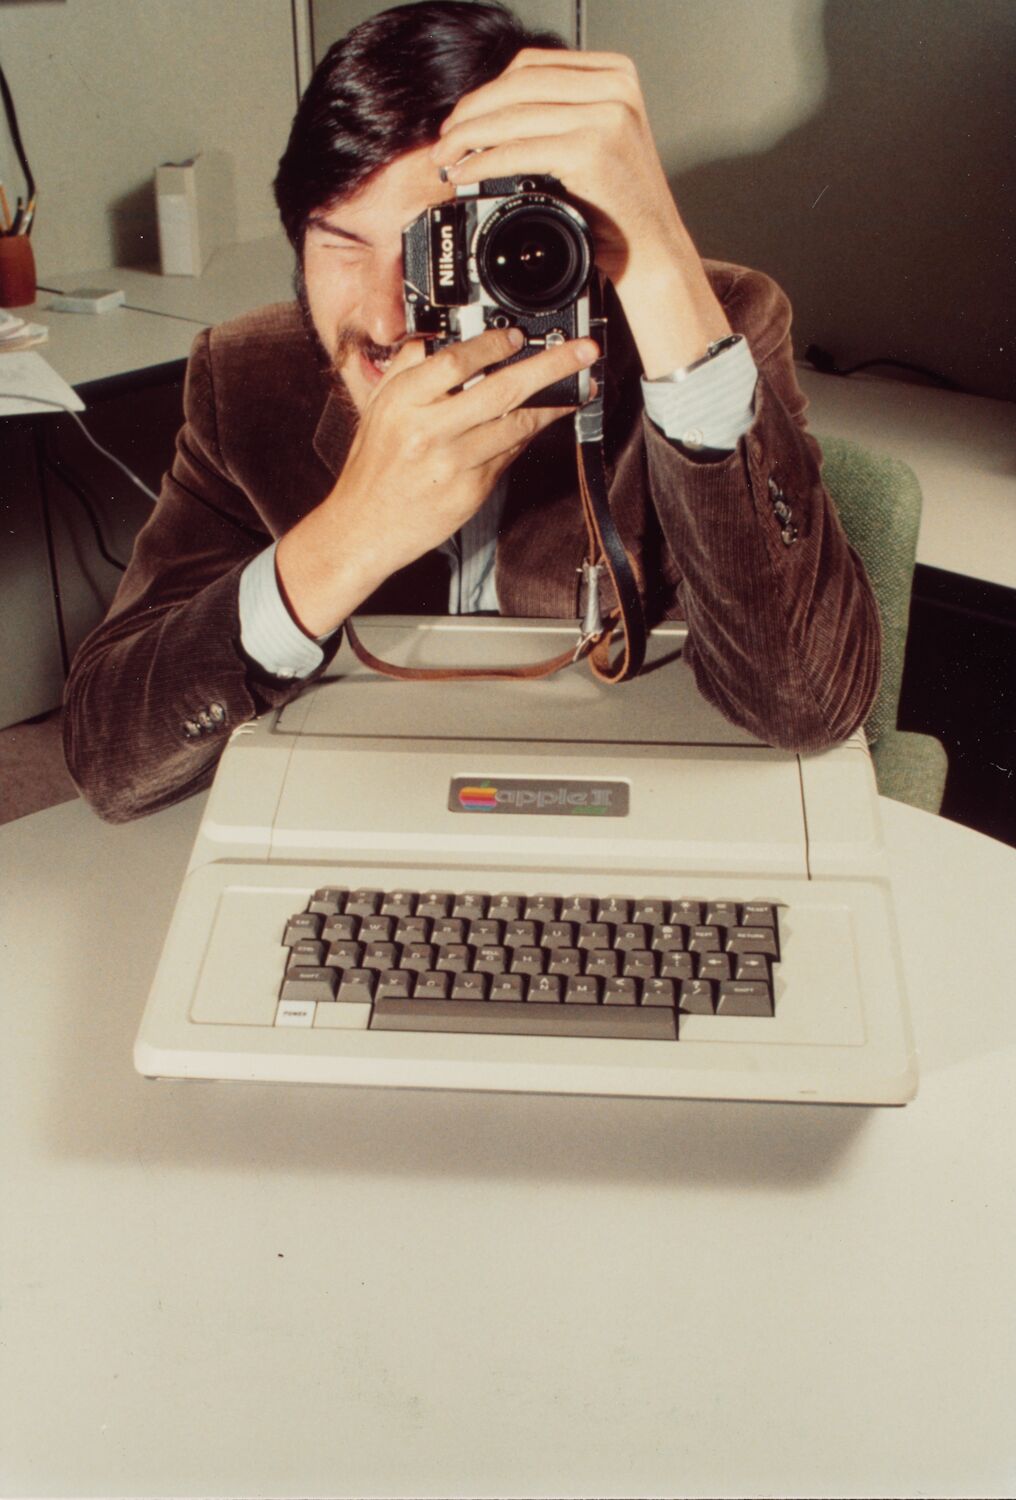 Steve peers through the lens of a Nikon camera as his elbow rests on the Apple II in front of him.